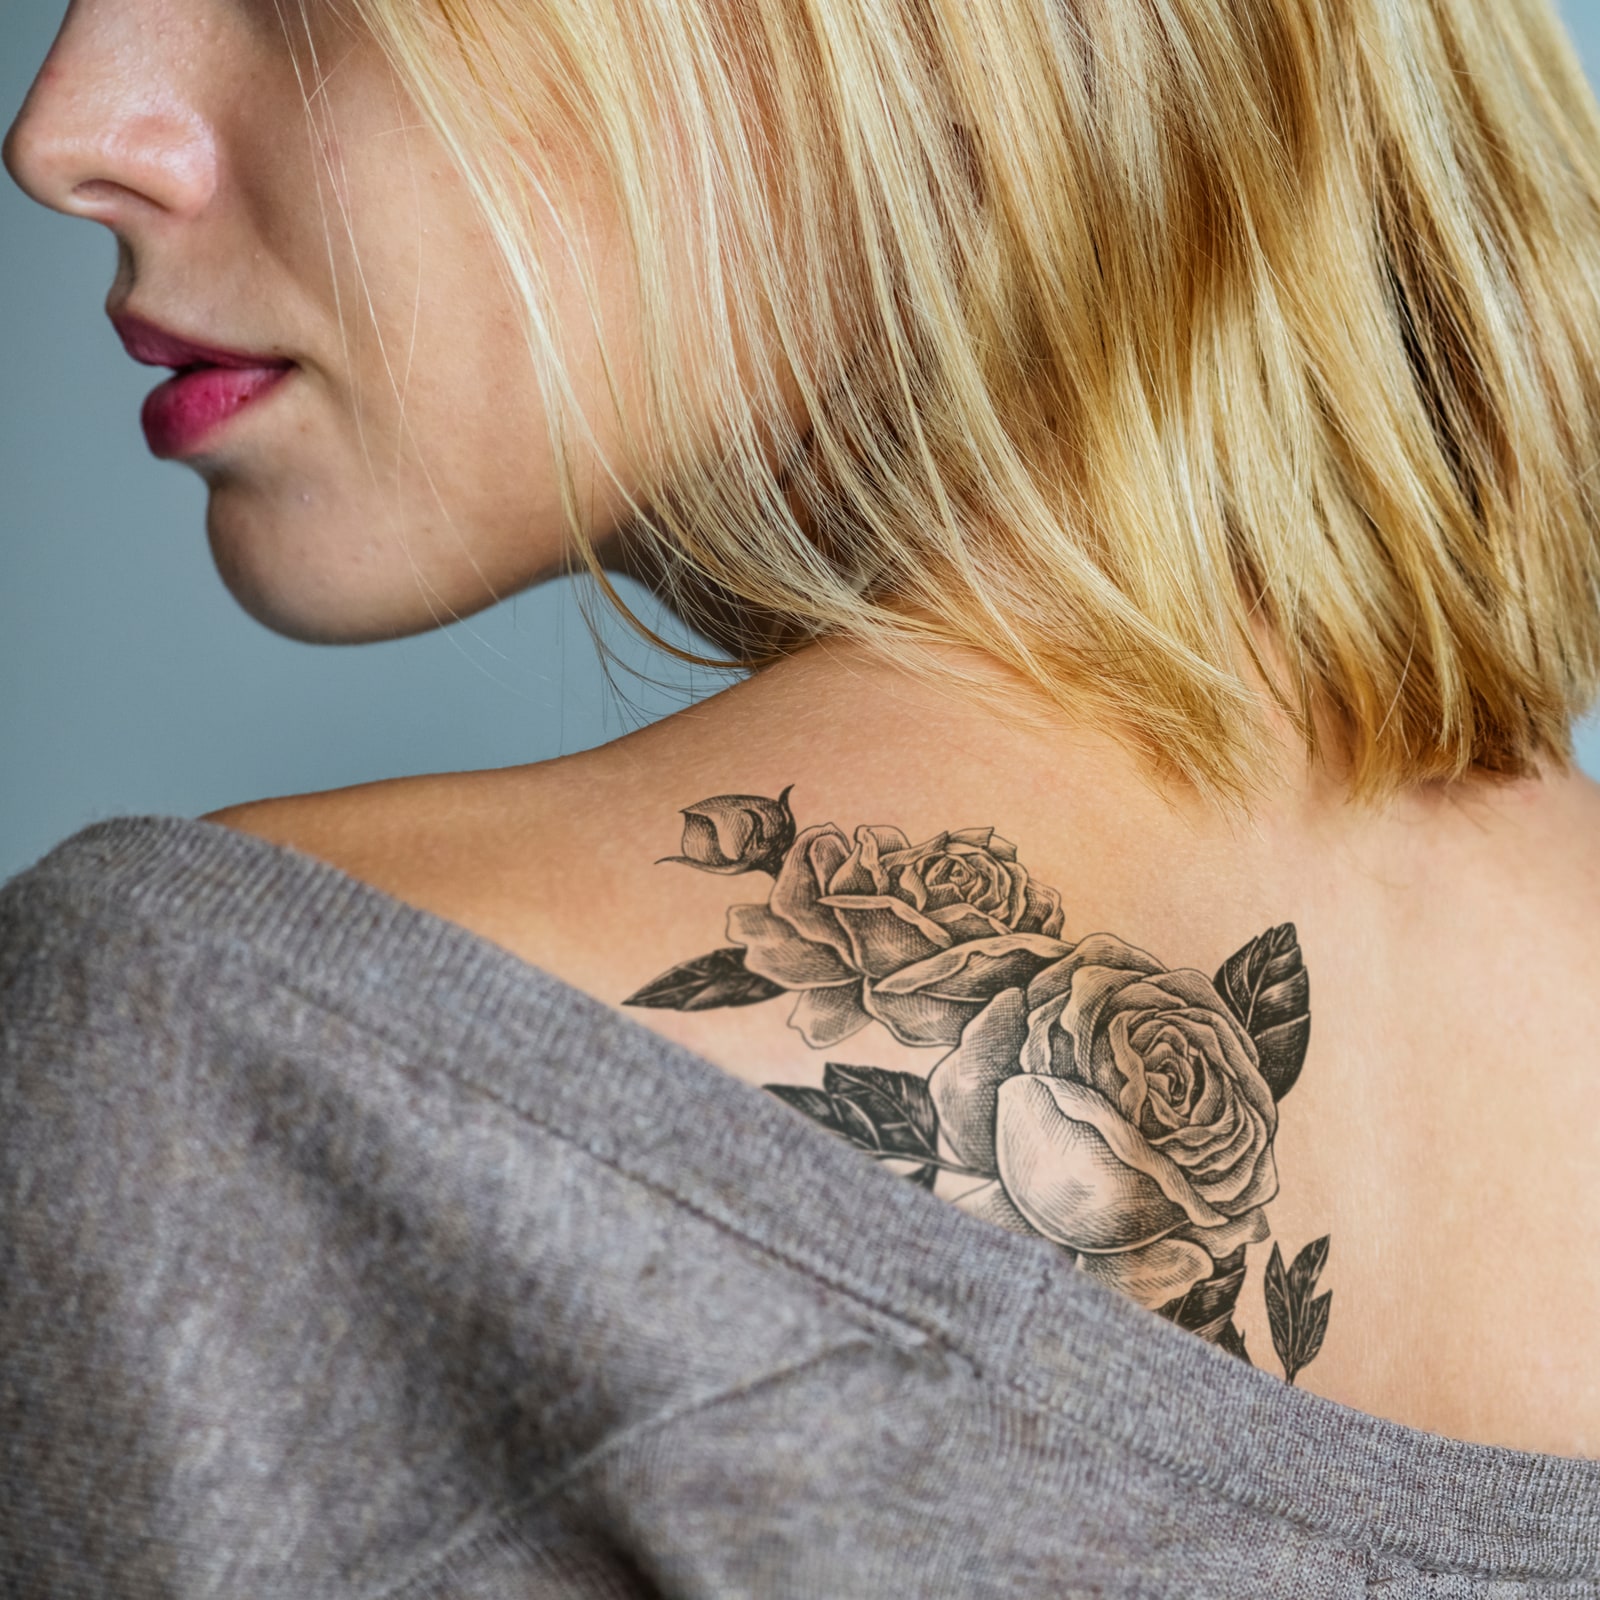 US news Almost half of tattoo inks contain chemical which could cause  cancer study finds